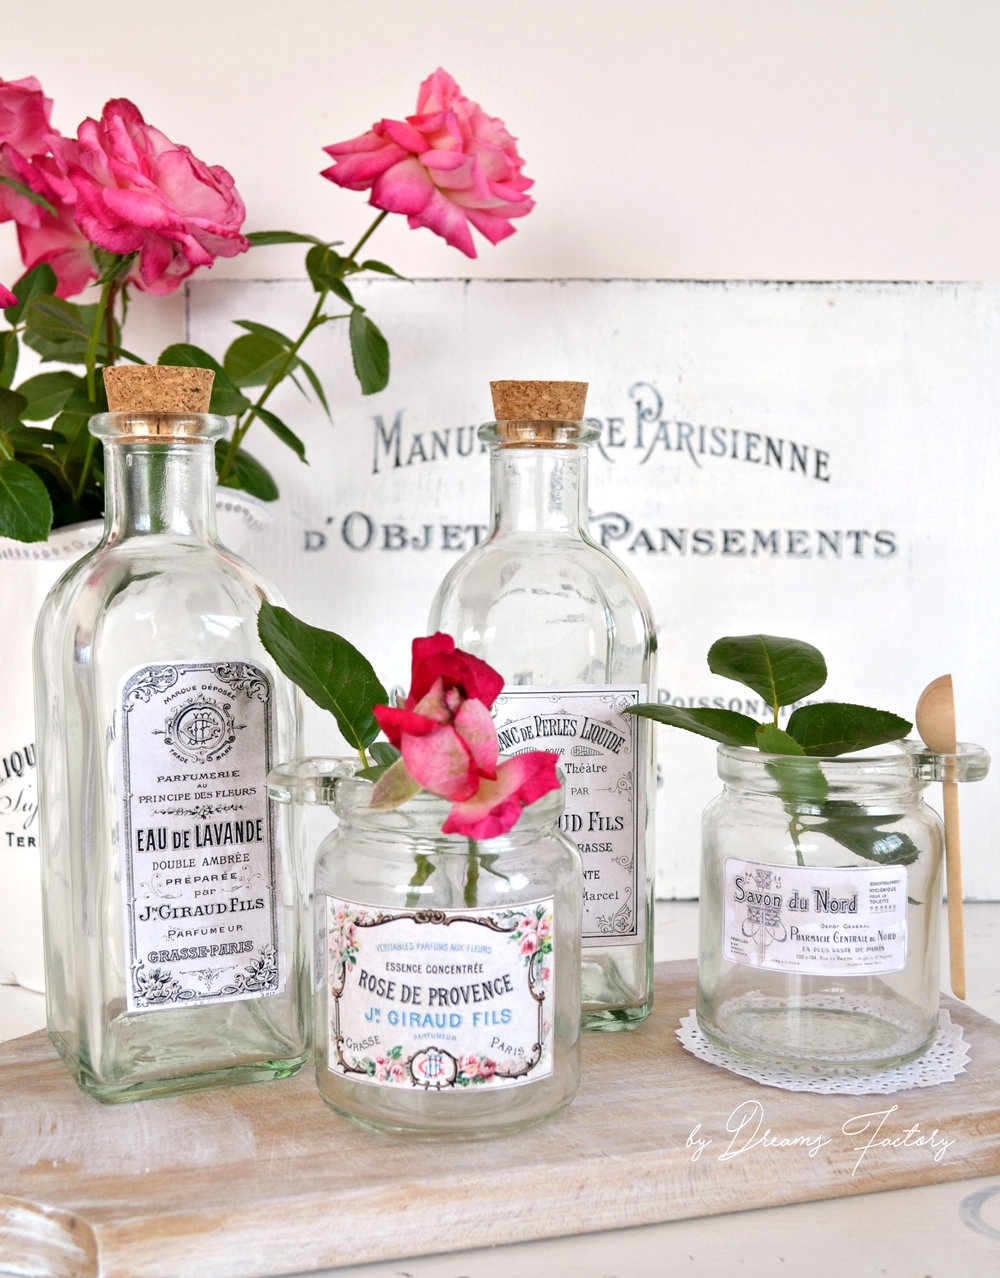 DIY Vintage French Apothecary Jars and Bottles - by Dreams Factory